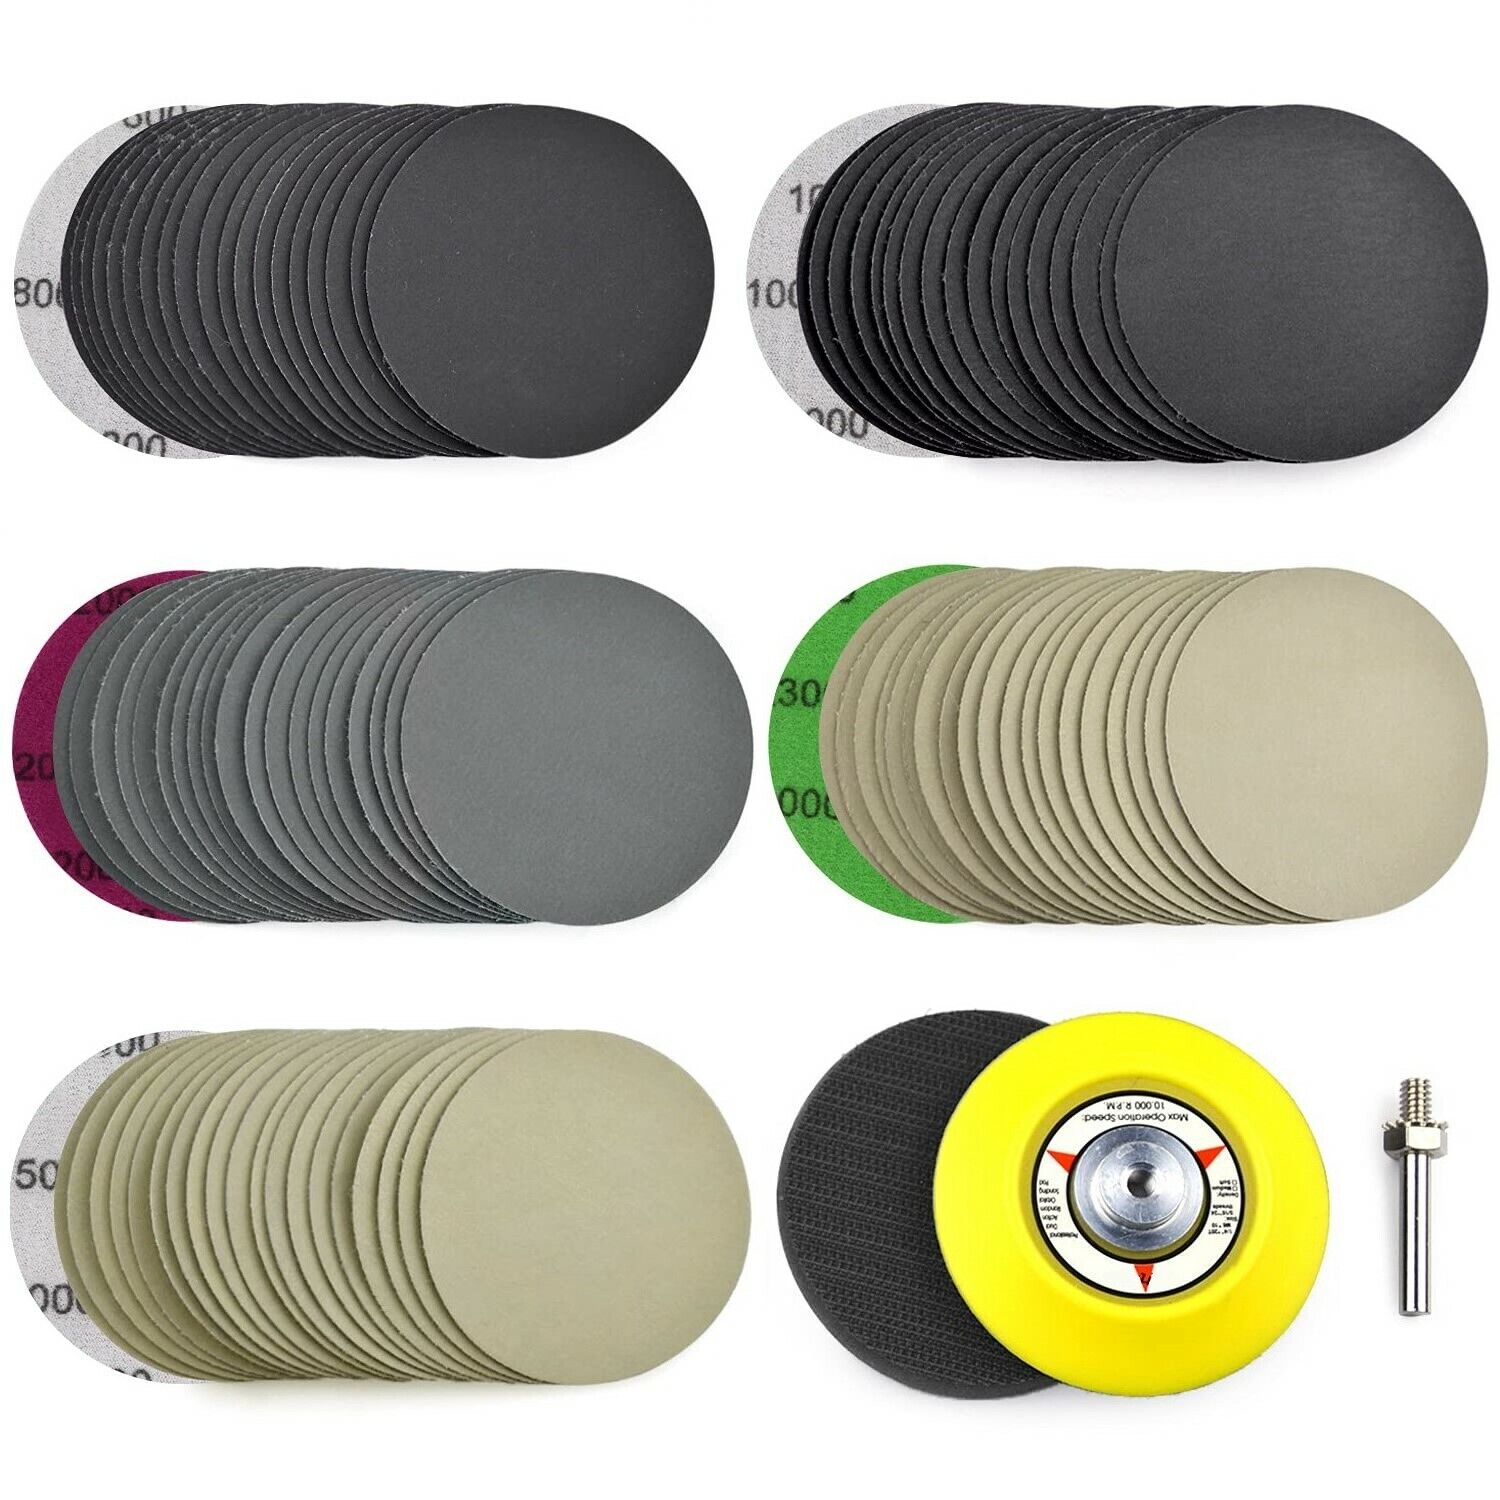 102x 3 in Sanding Discs 800-5000 Grit for Drill Wet Dry Hook Loop Sandpaper Pads Satc Does Not Apply